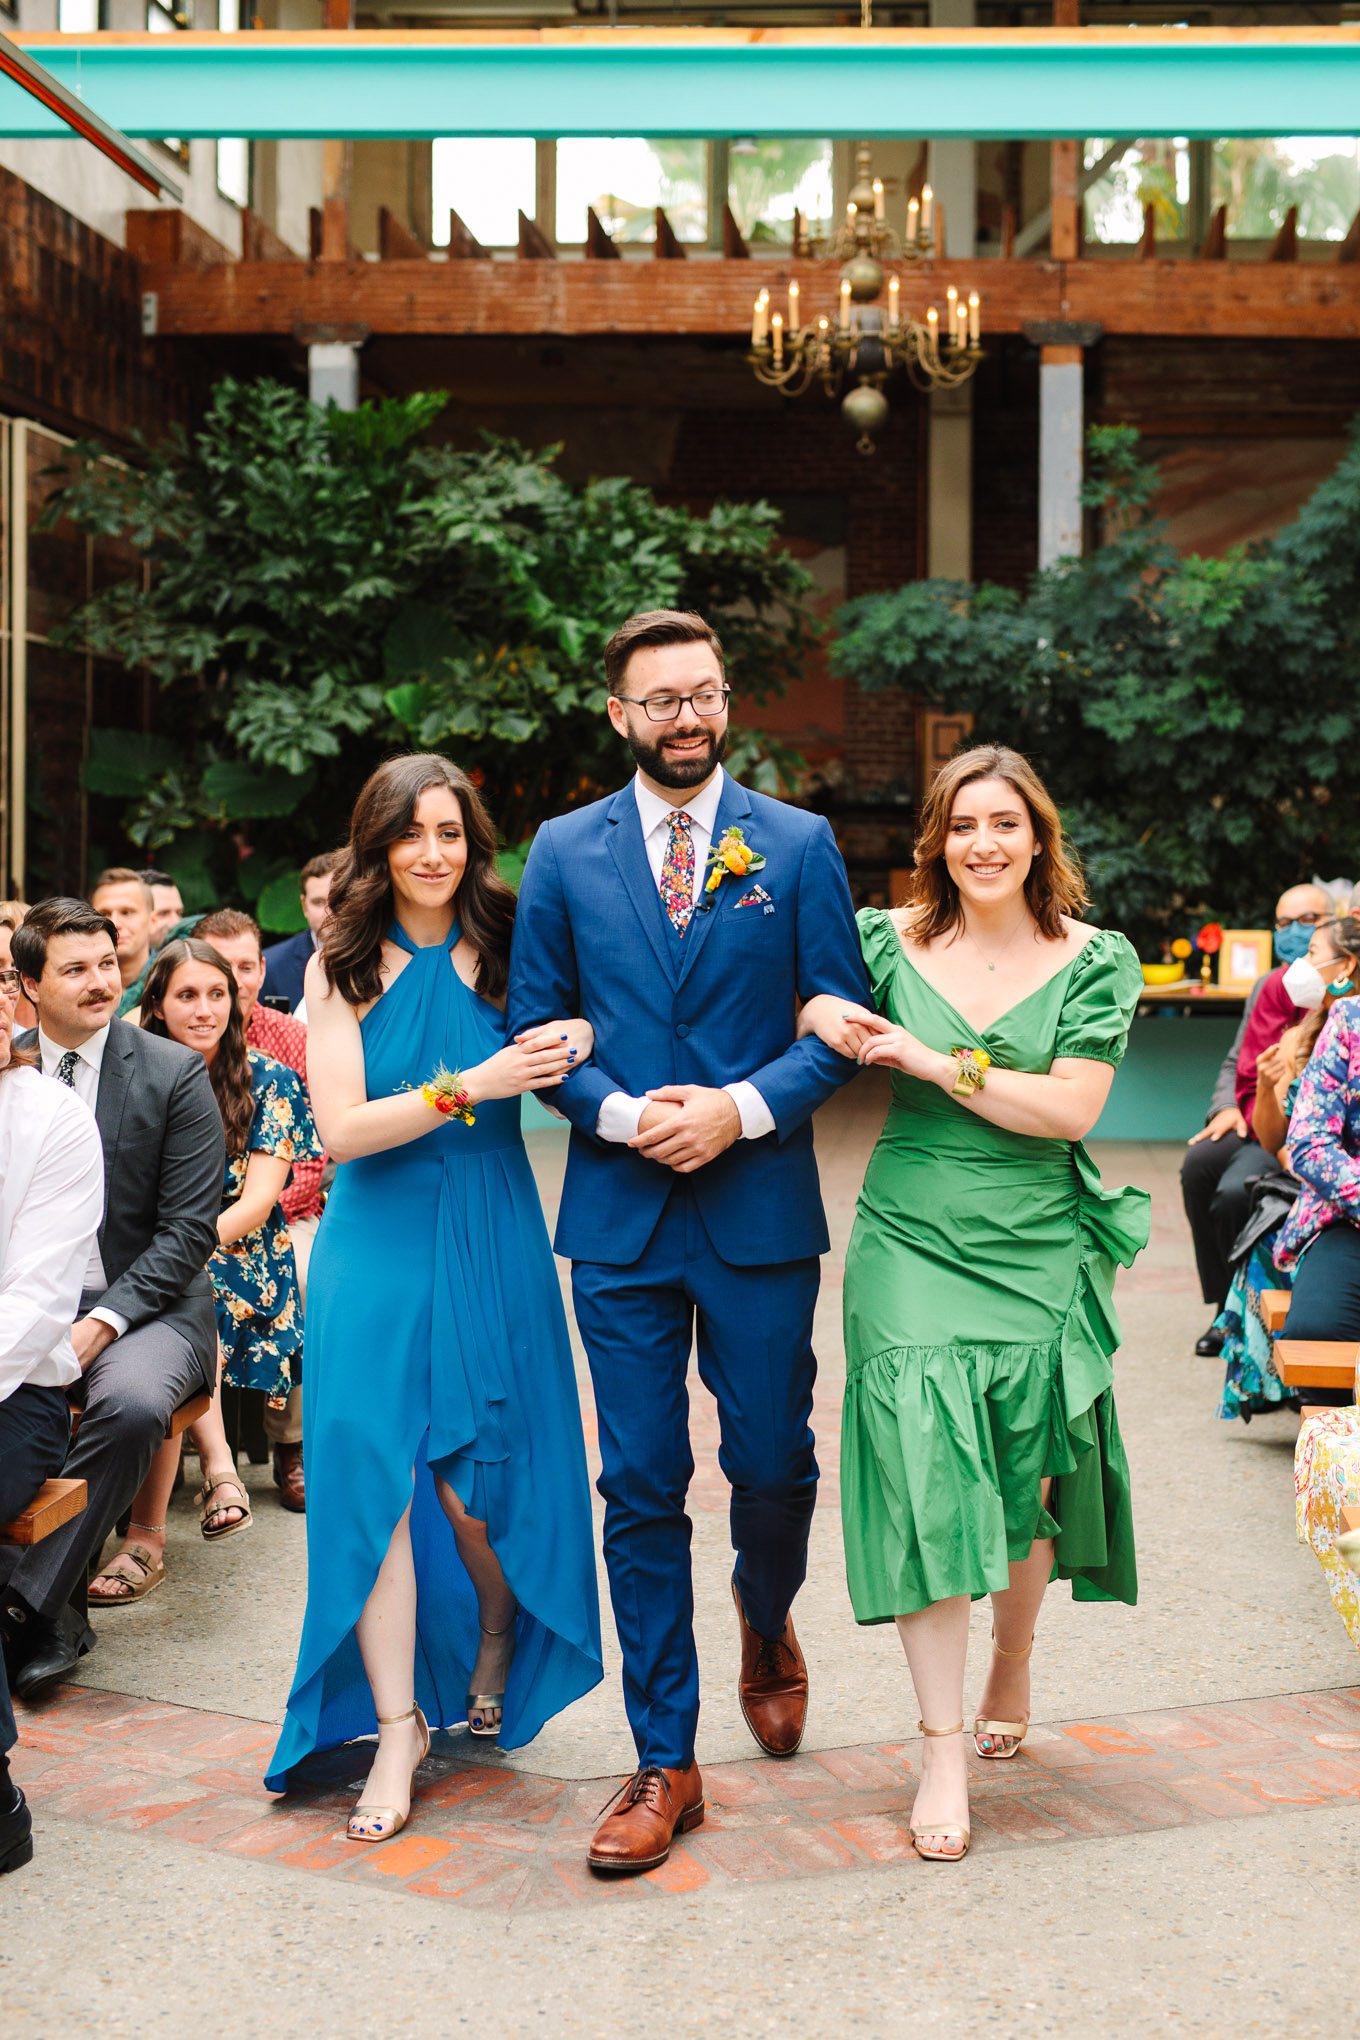 Groom walking down the aisle with sisters | Colorful Downtown Los Angeles Valentine Wedding | Los Angeles wedding photographer | #losangeleswedding #colorfulwedding #DTLA #valentinedtla   Source: Mary Costa Photography | Los Angeles